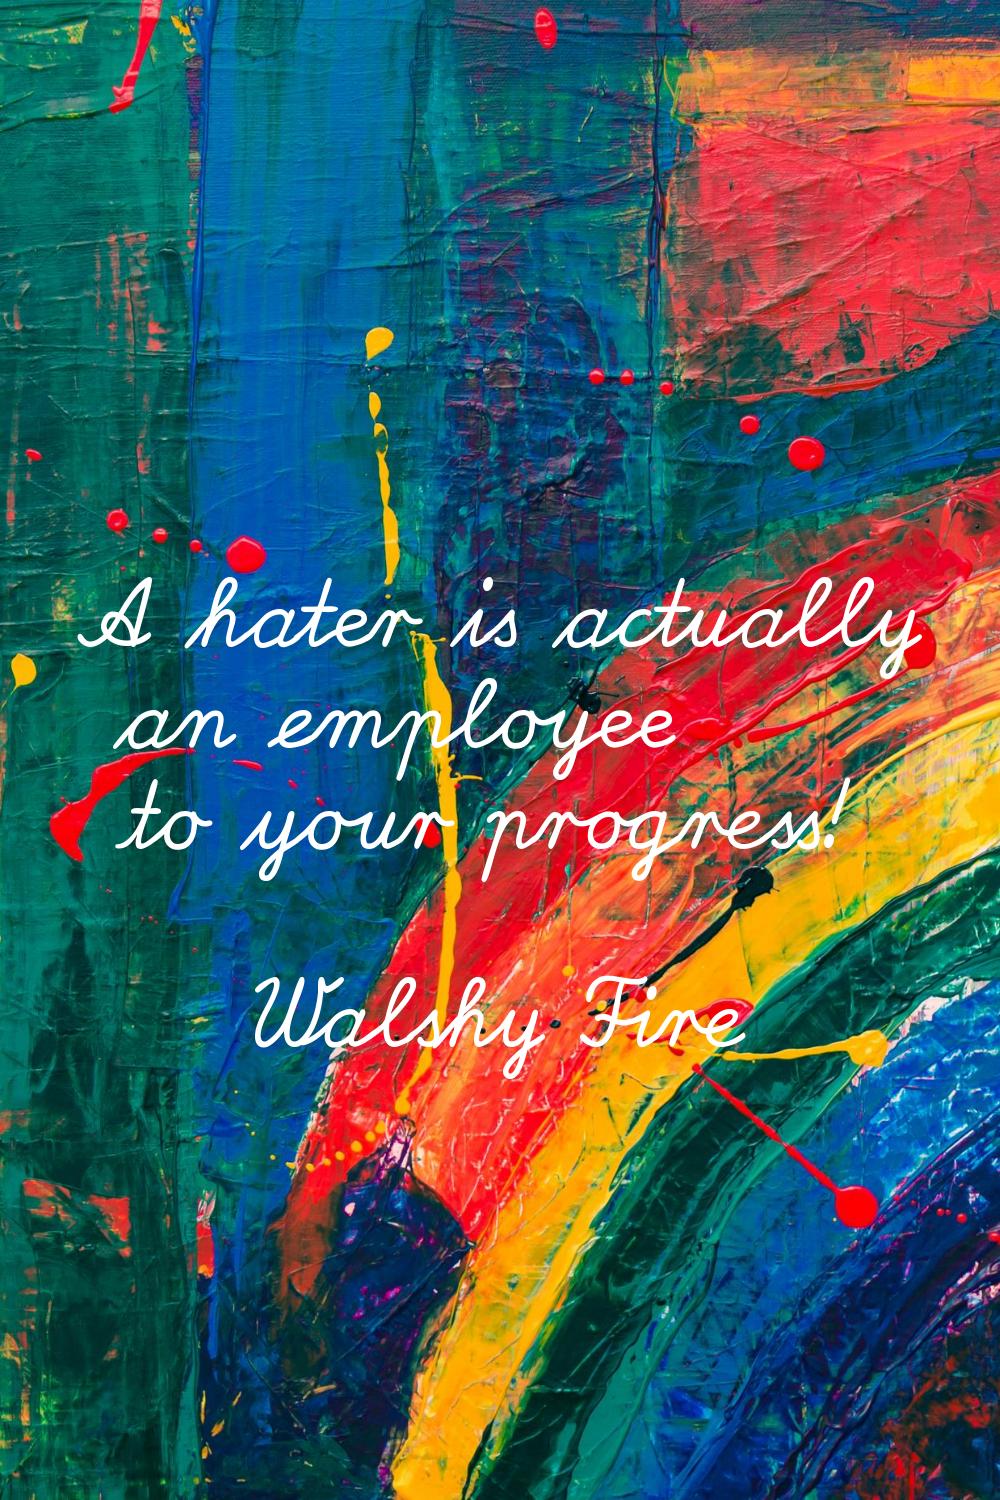 A hater is actually an employee to your progress!